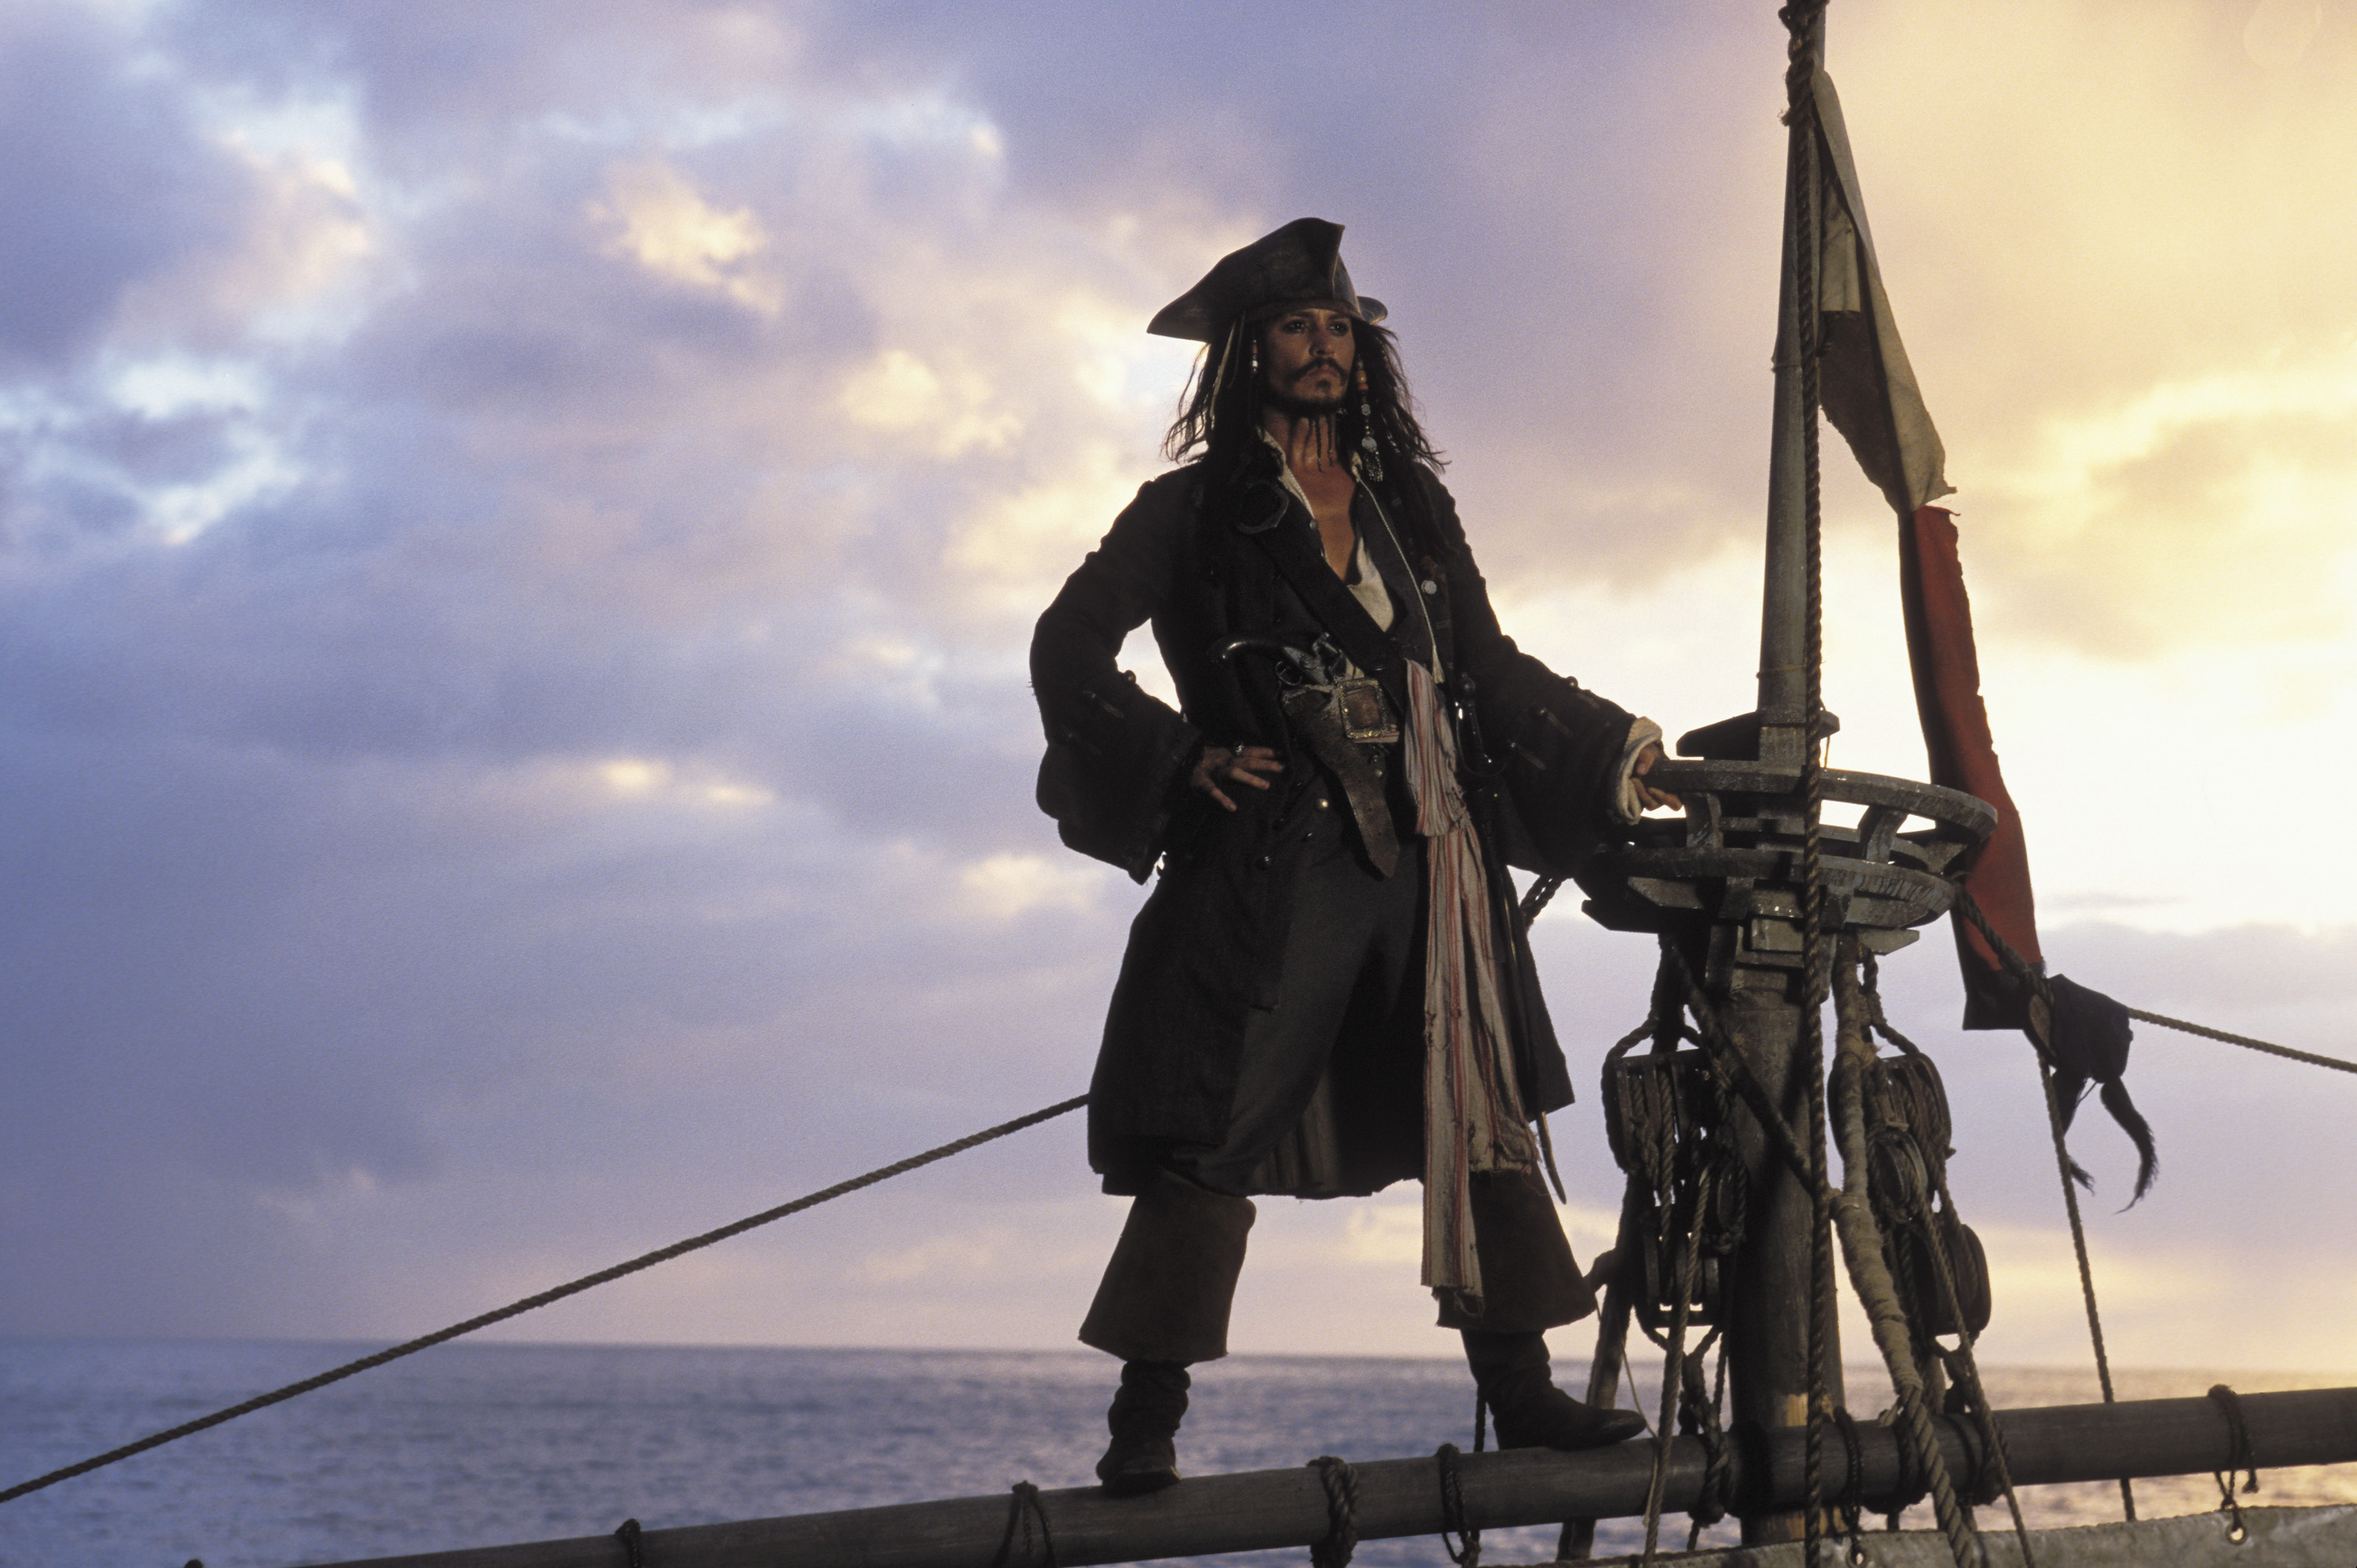 Movie Pirates Of The Caribbean: The Curse Of The Black Pearl HD Wallpaper | Background Image